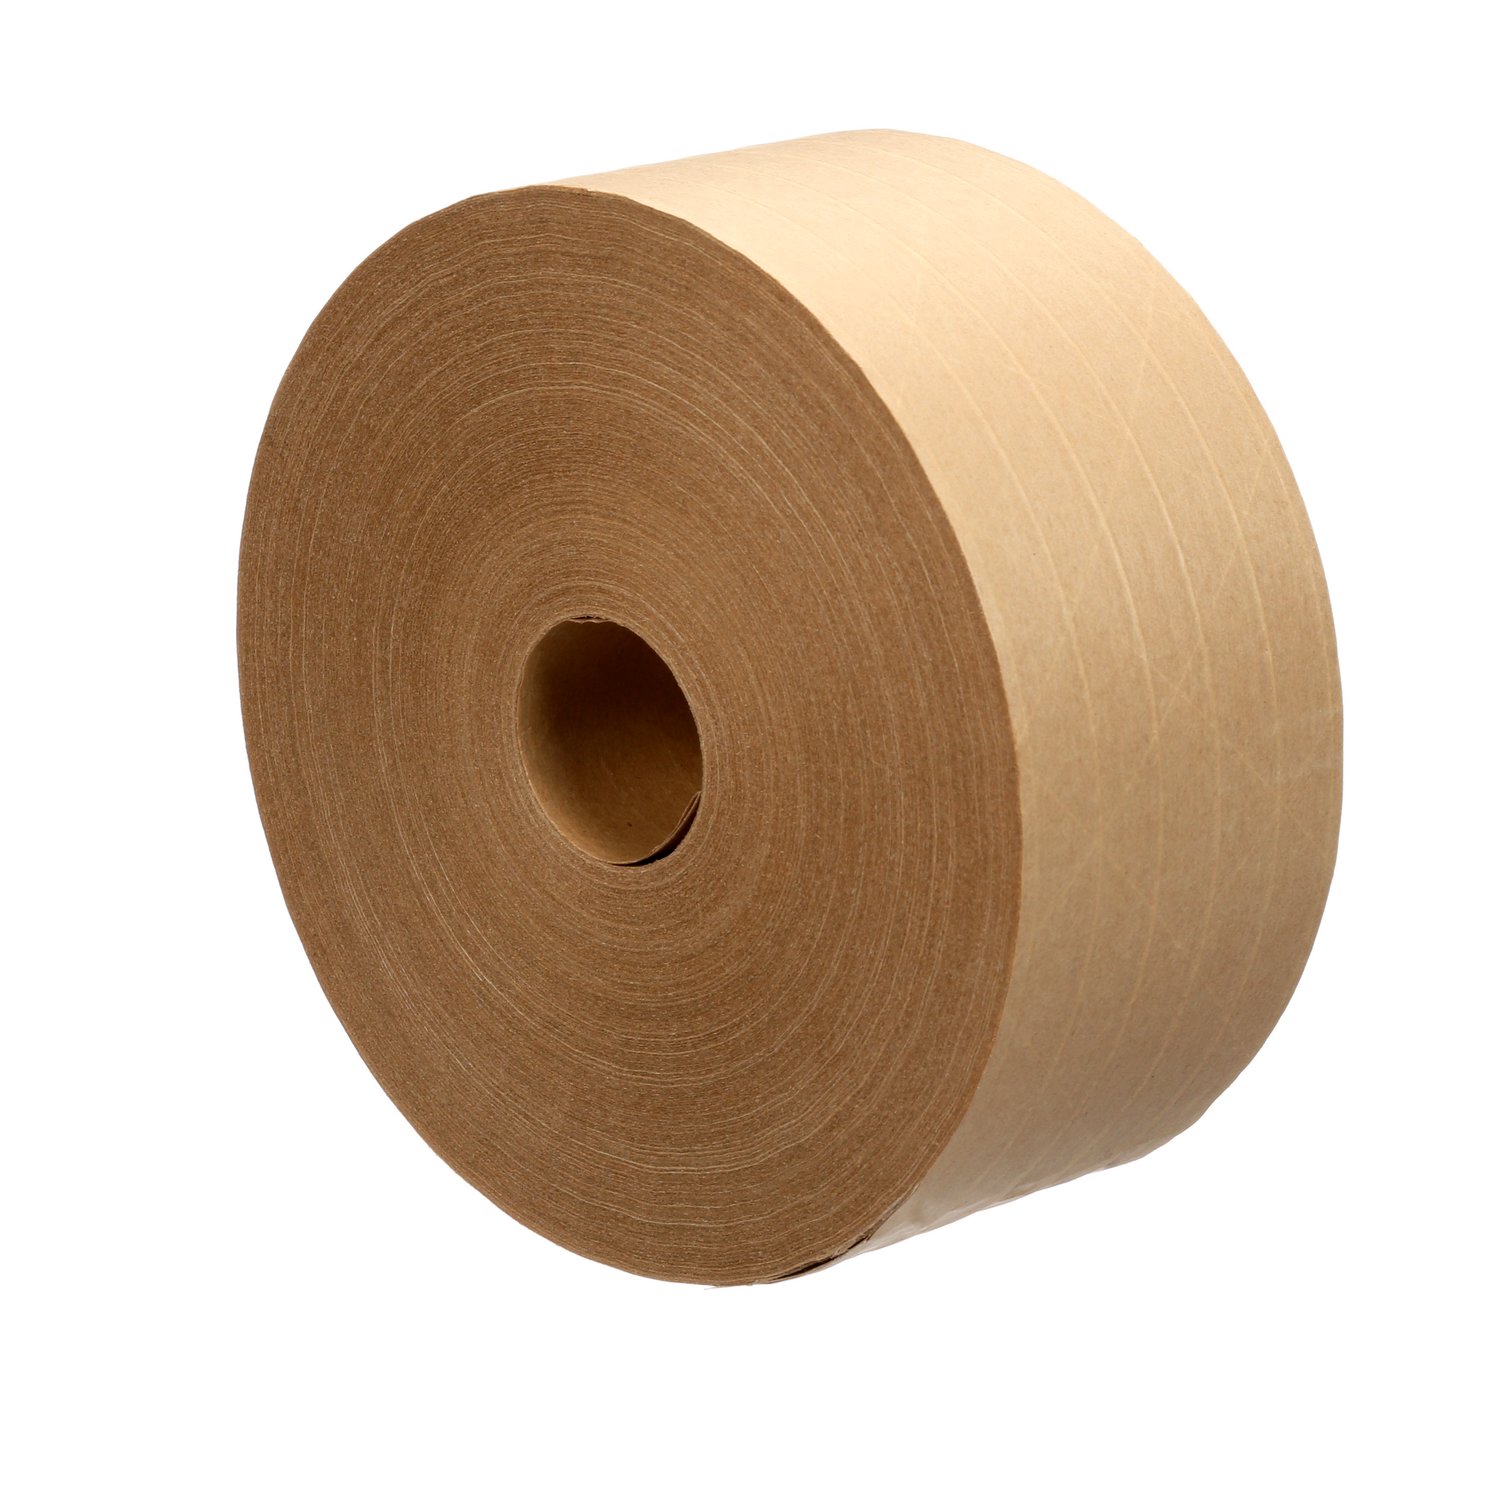 7010335231 - 3M Water Activated Paper Tape 6146, Natural, Medium Duty Reinforced, 72
mm x 600 ft, 10/Case